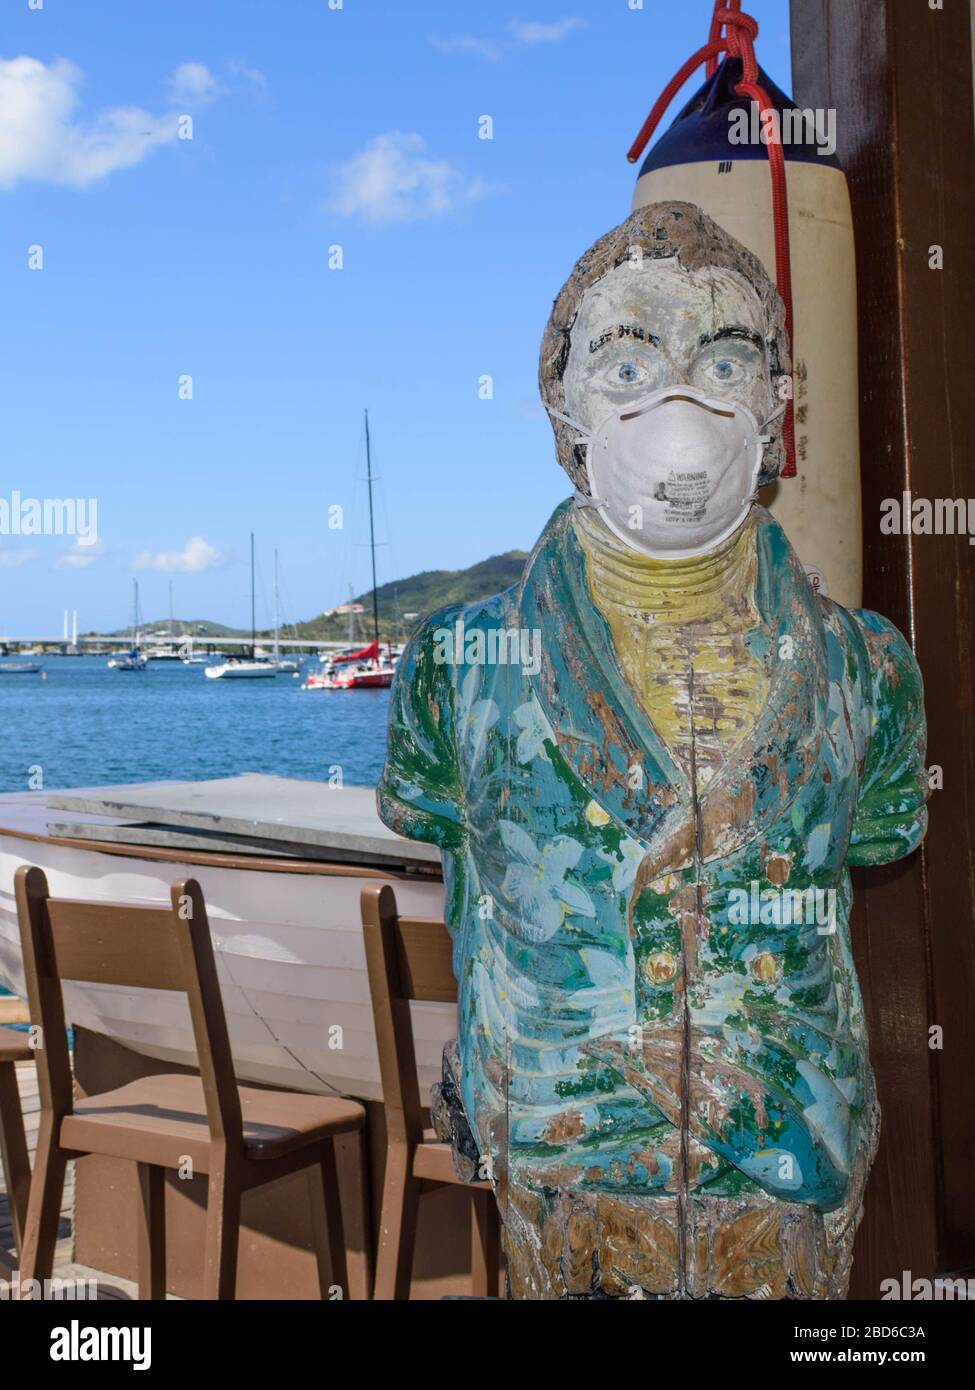 Elvis, bar mascot at SMYC Bar & Restaurant, wears a (used) face mask while it is empty and closed for the Covid-19 Pandemic Stock Photo